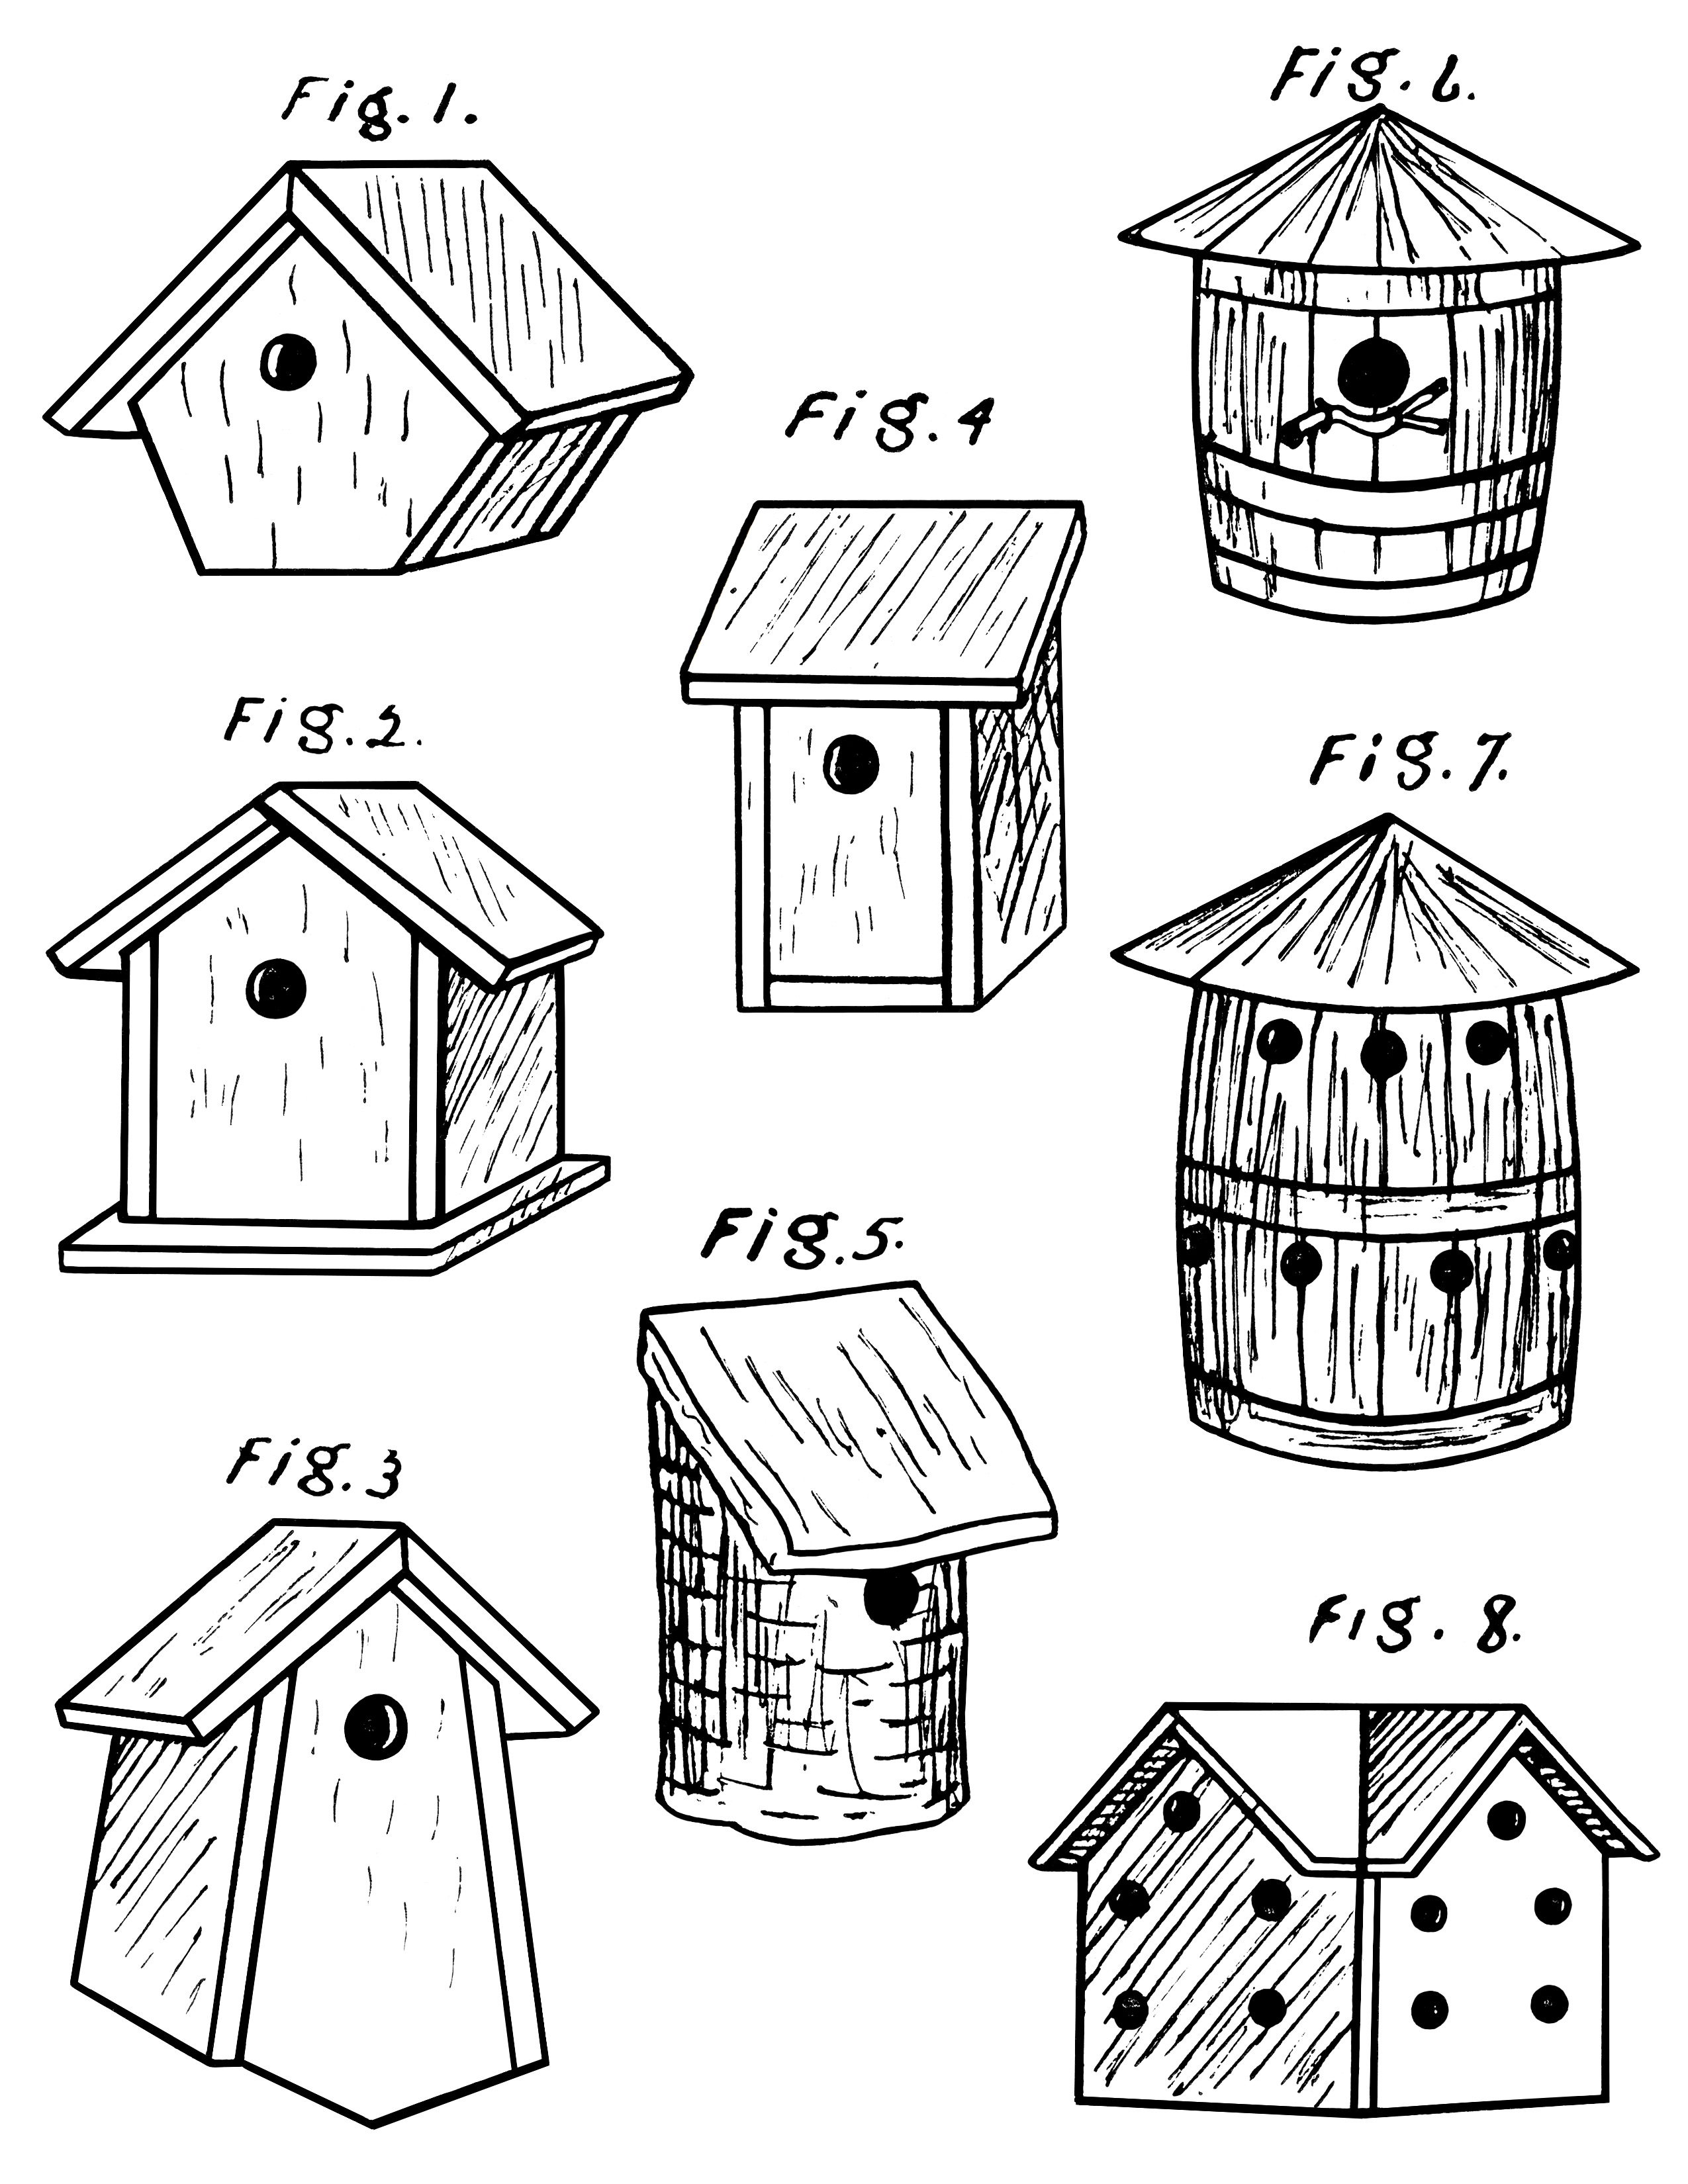 birdhouse clipart black and white